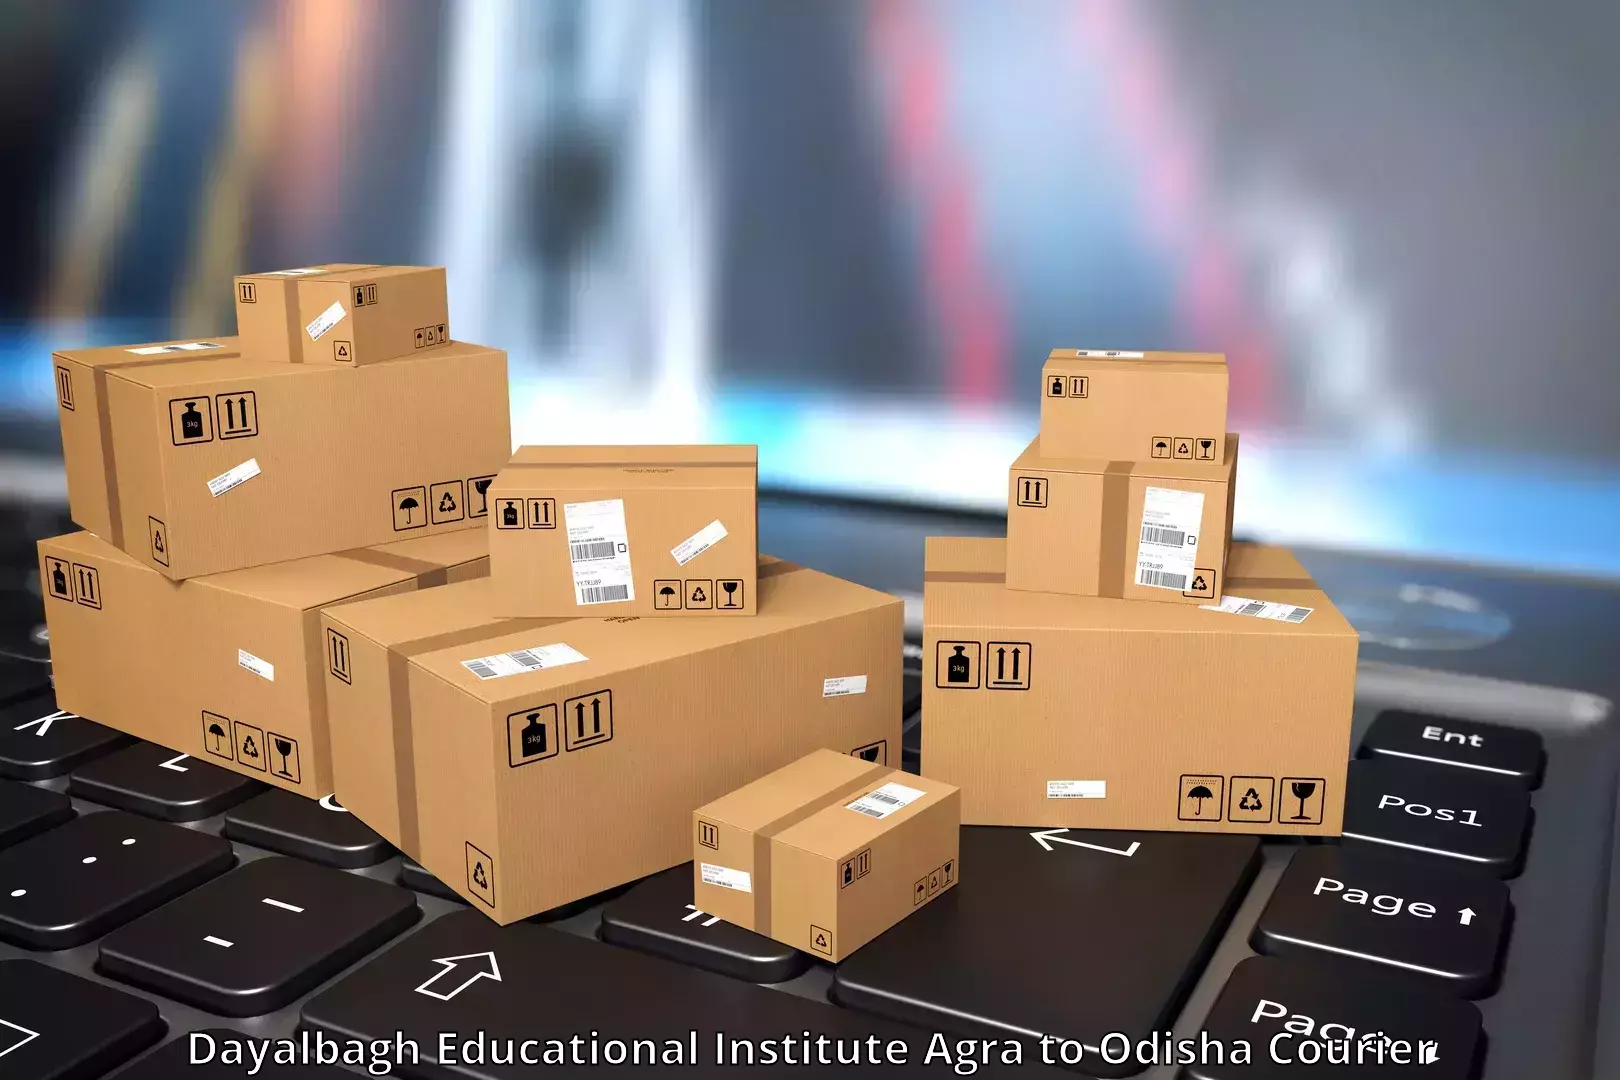 Full-service courier options Dayalbagh Educational Institute Agra to Odisha